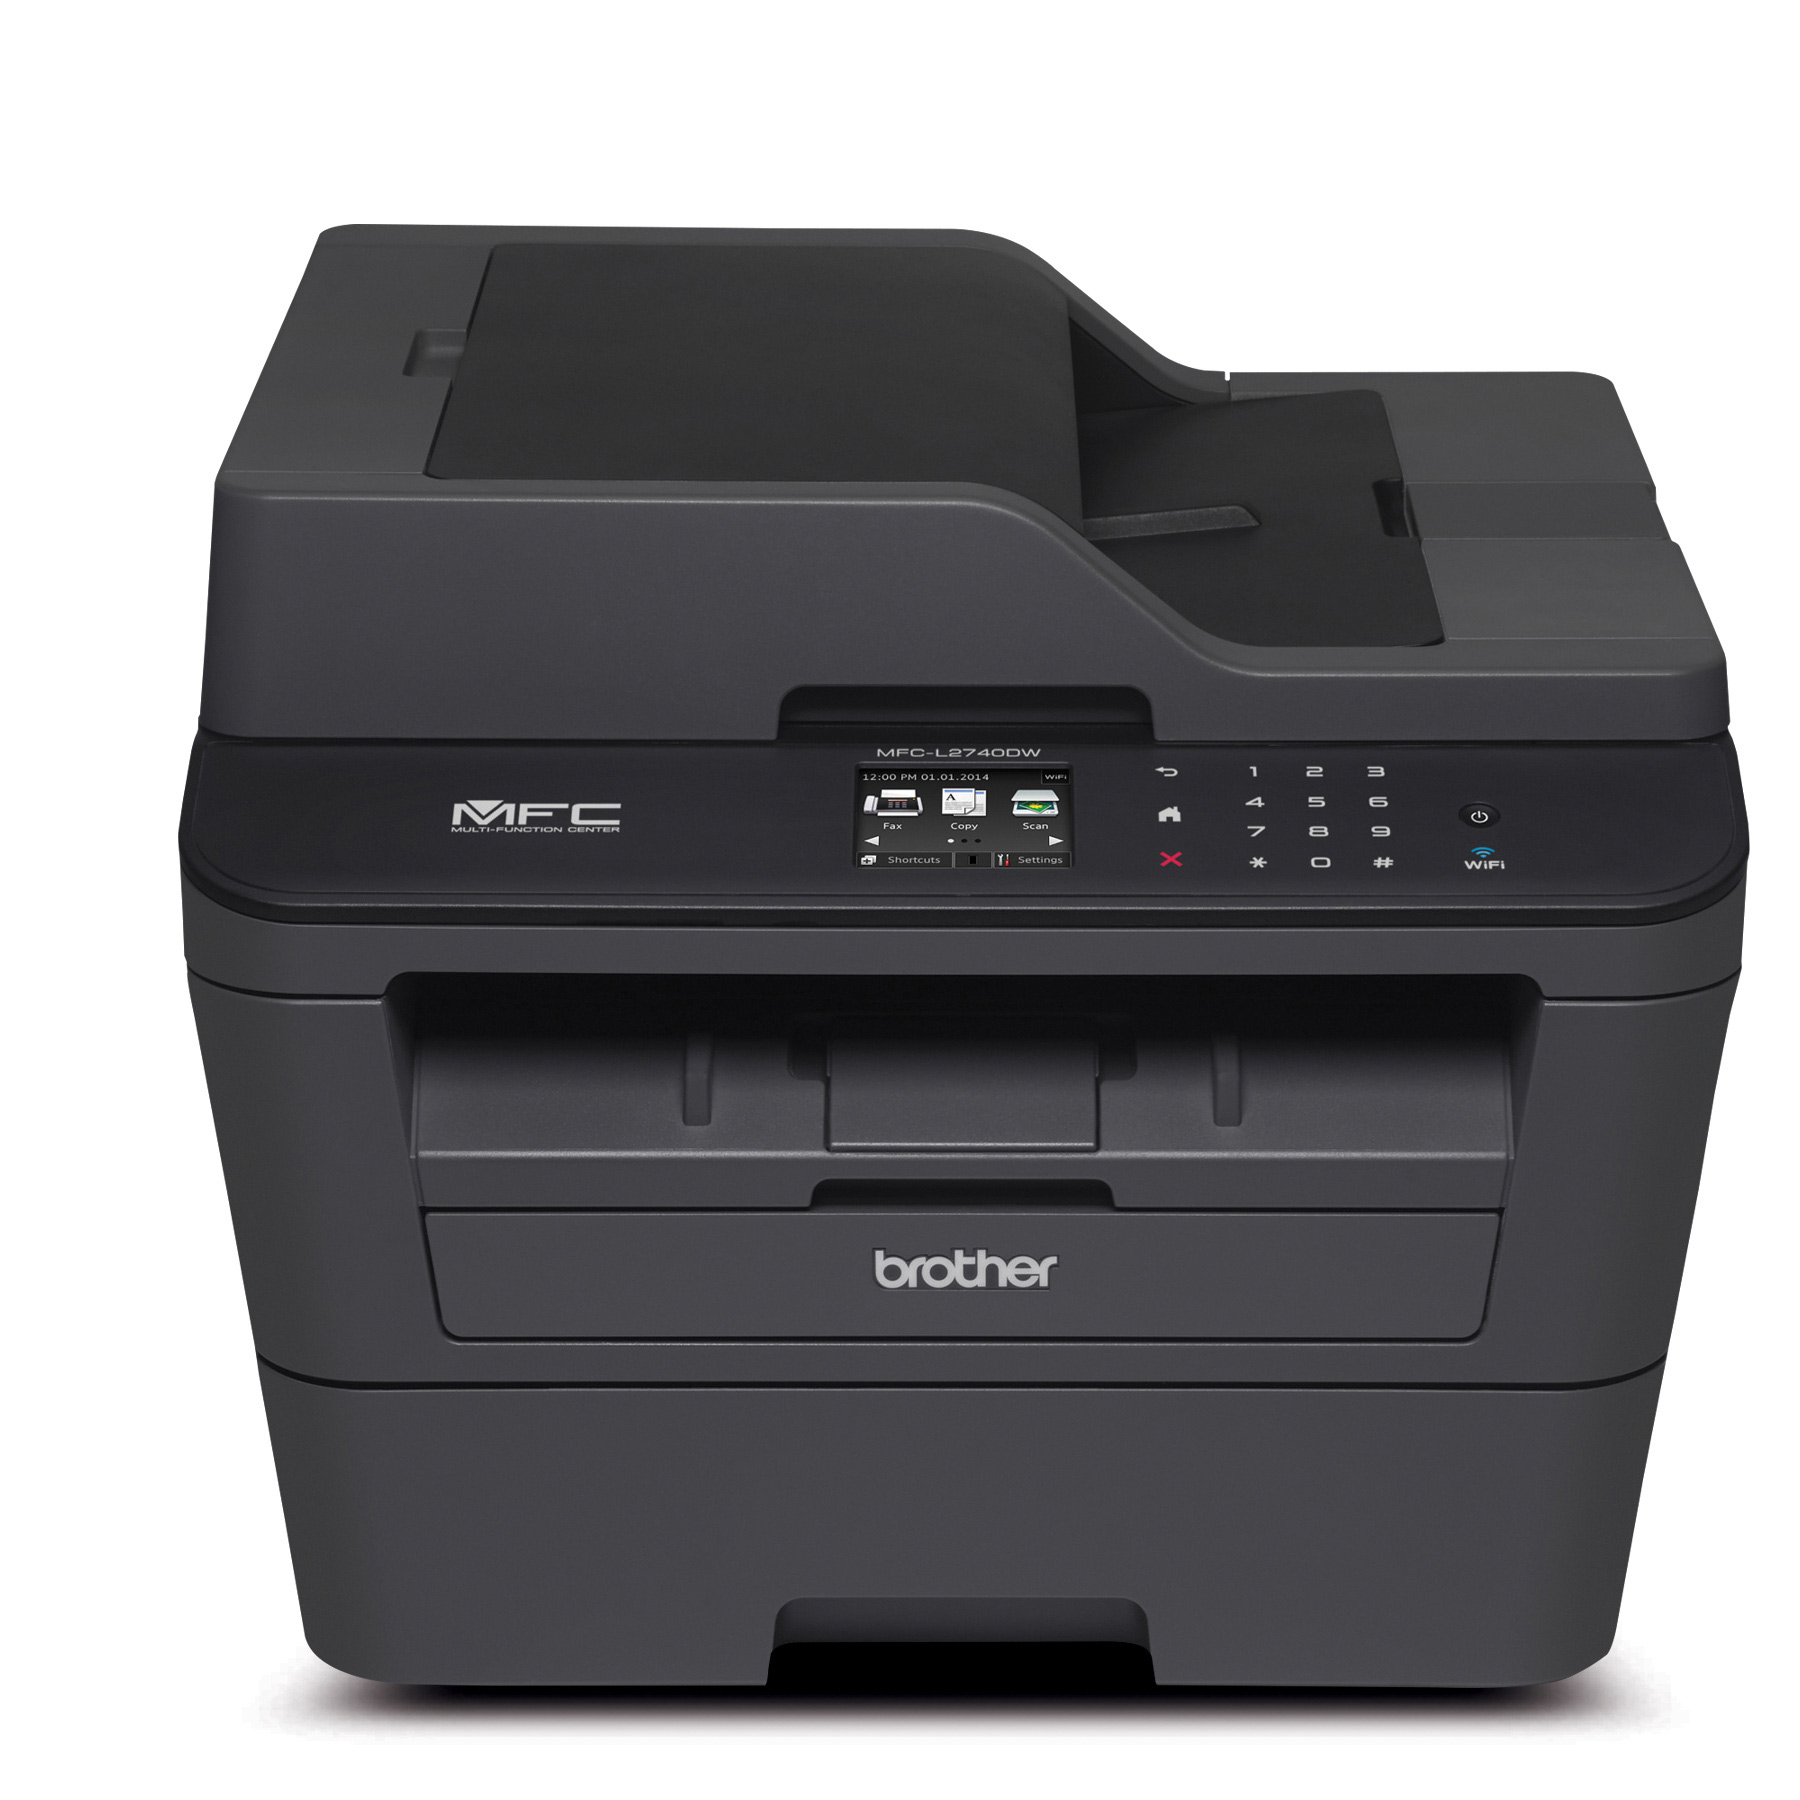 Brother MFC-L2740DW All-in-One Monochrome Laser Printer